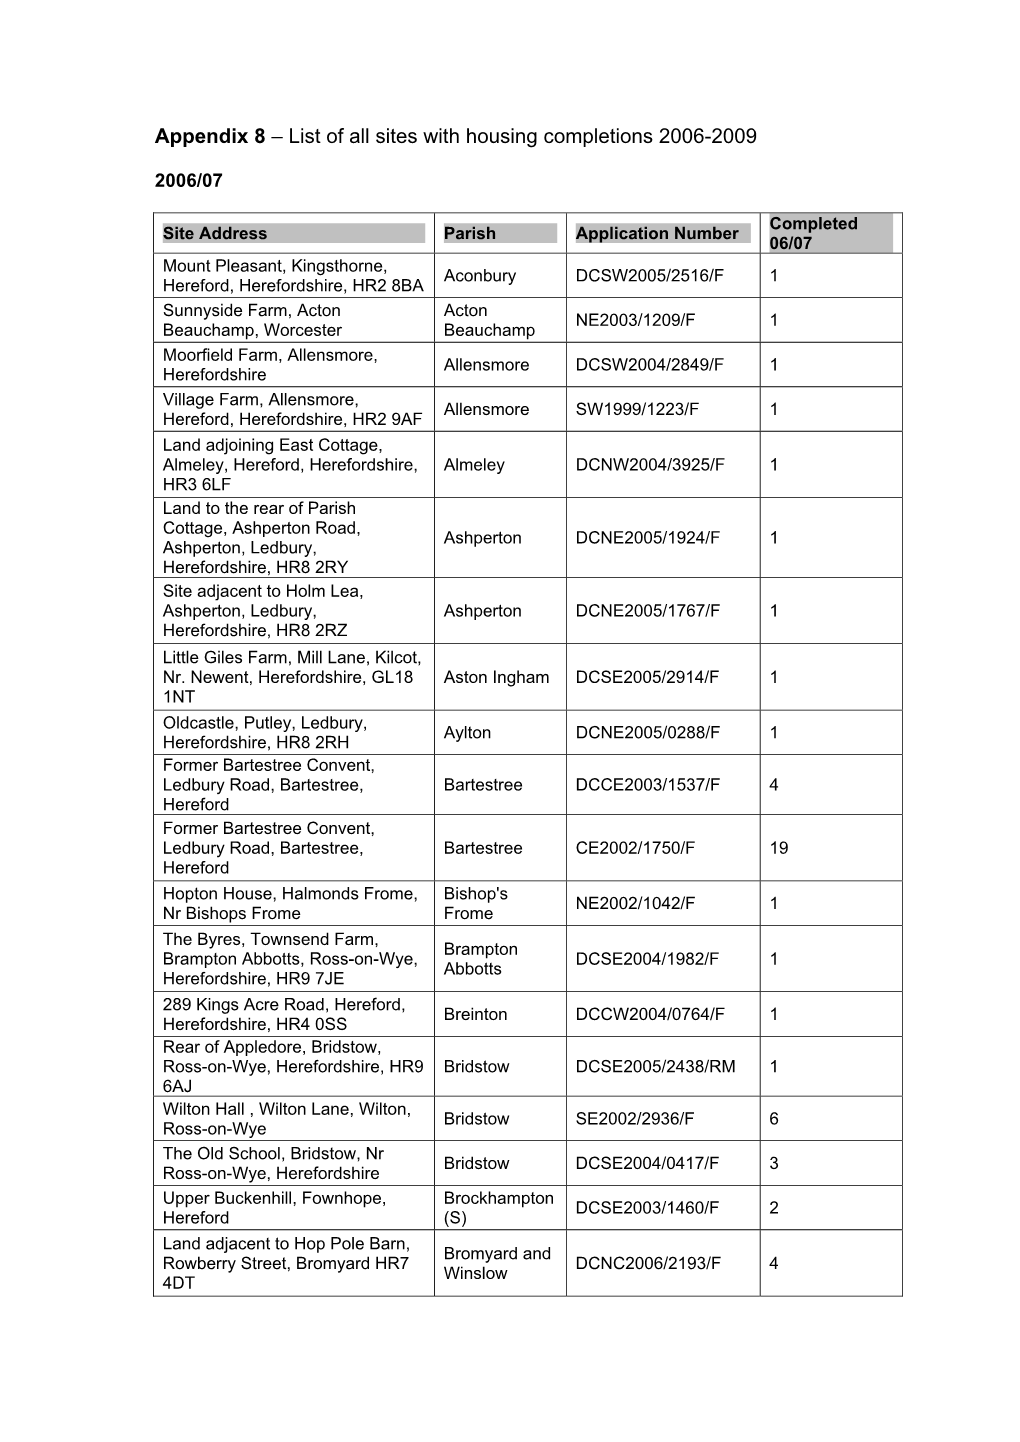 Appendix 8 – List of All Sites with Housing Completions 2006-2009